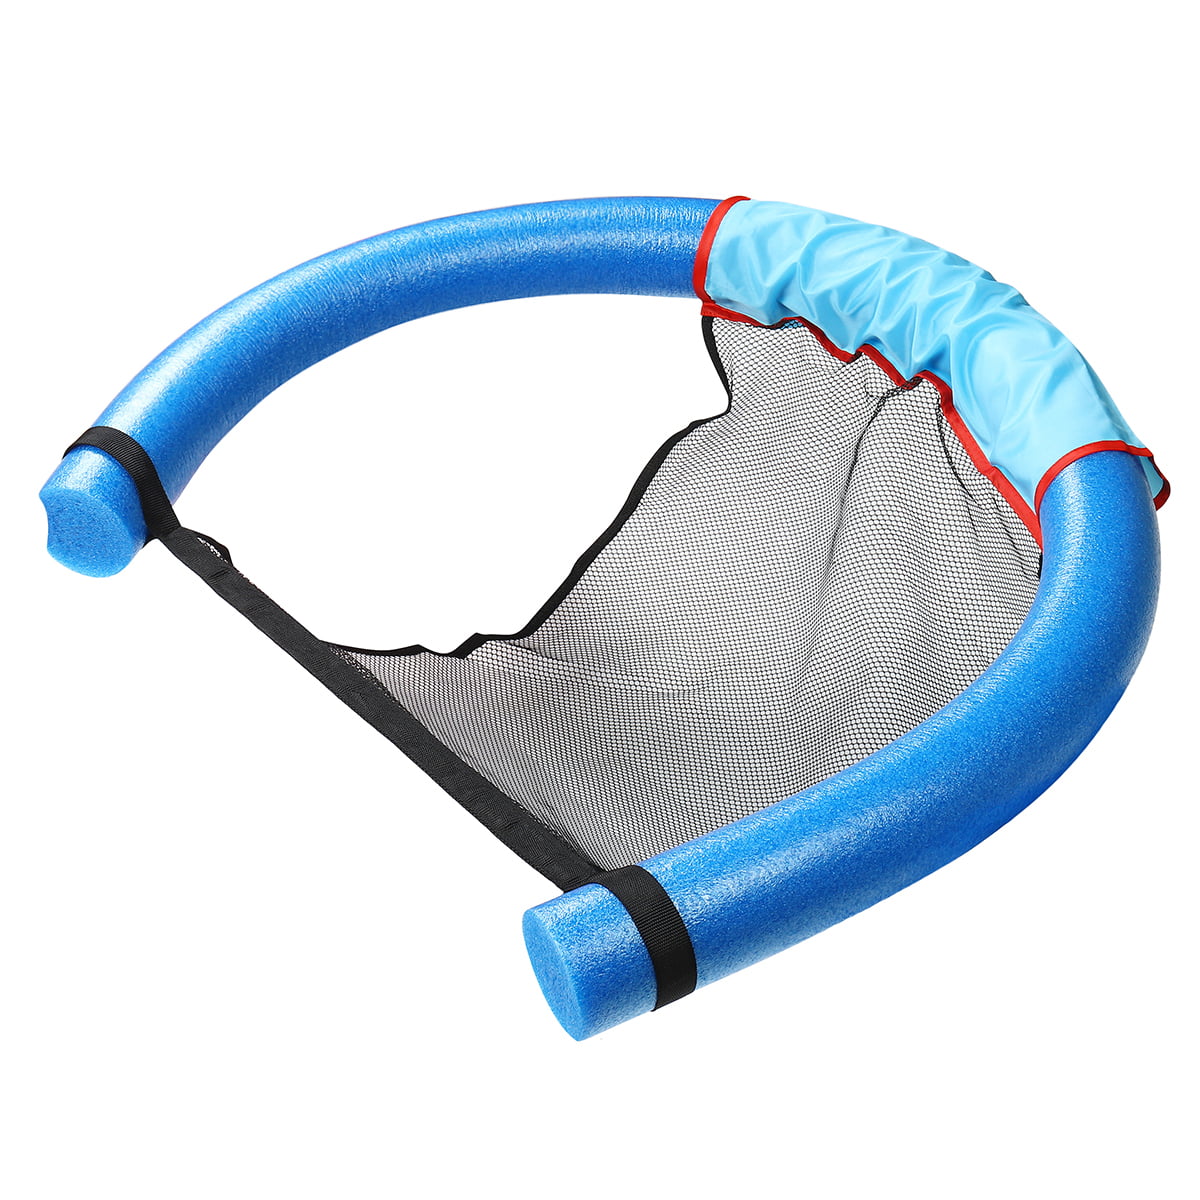 TAESOUW Floating Chair,Floating Pool Noodle Sling Mesh Chairs Blue, Large Water Relaxation